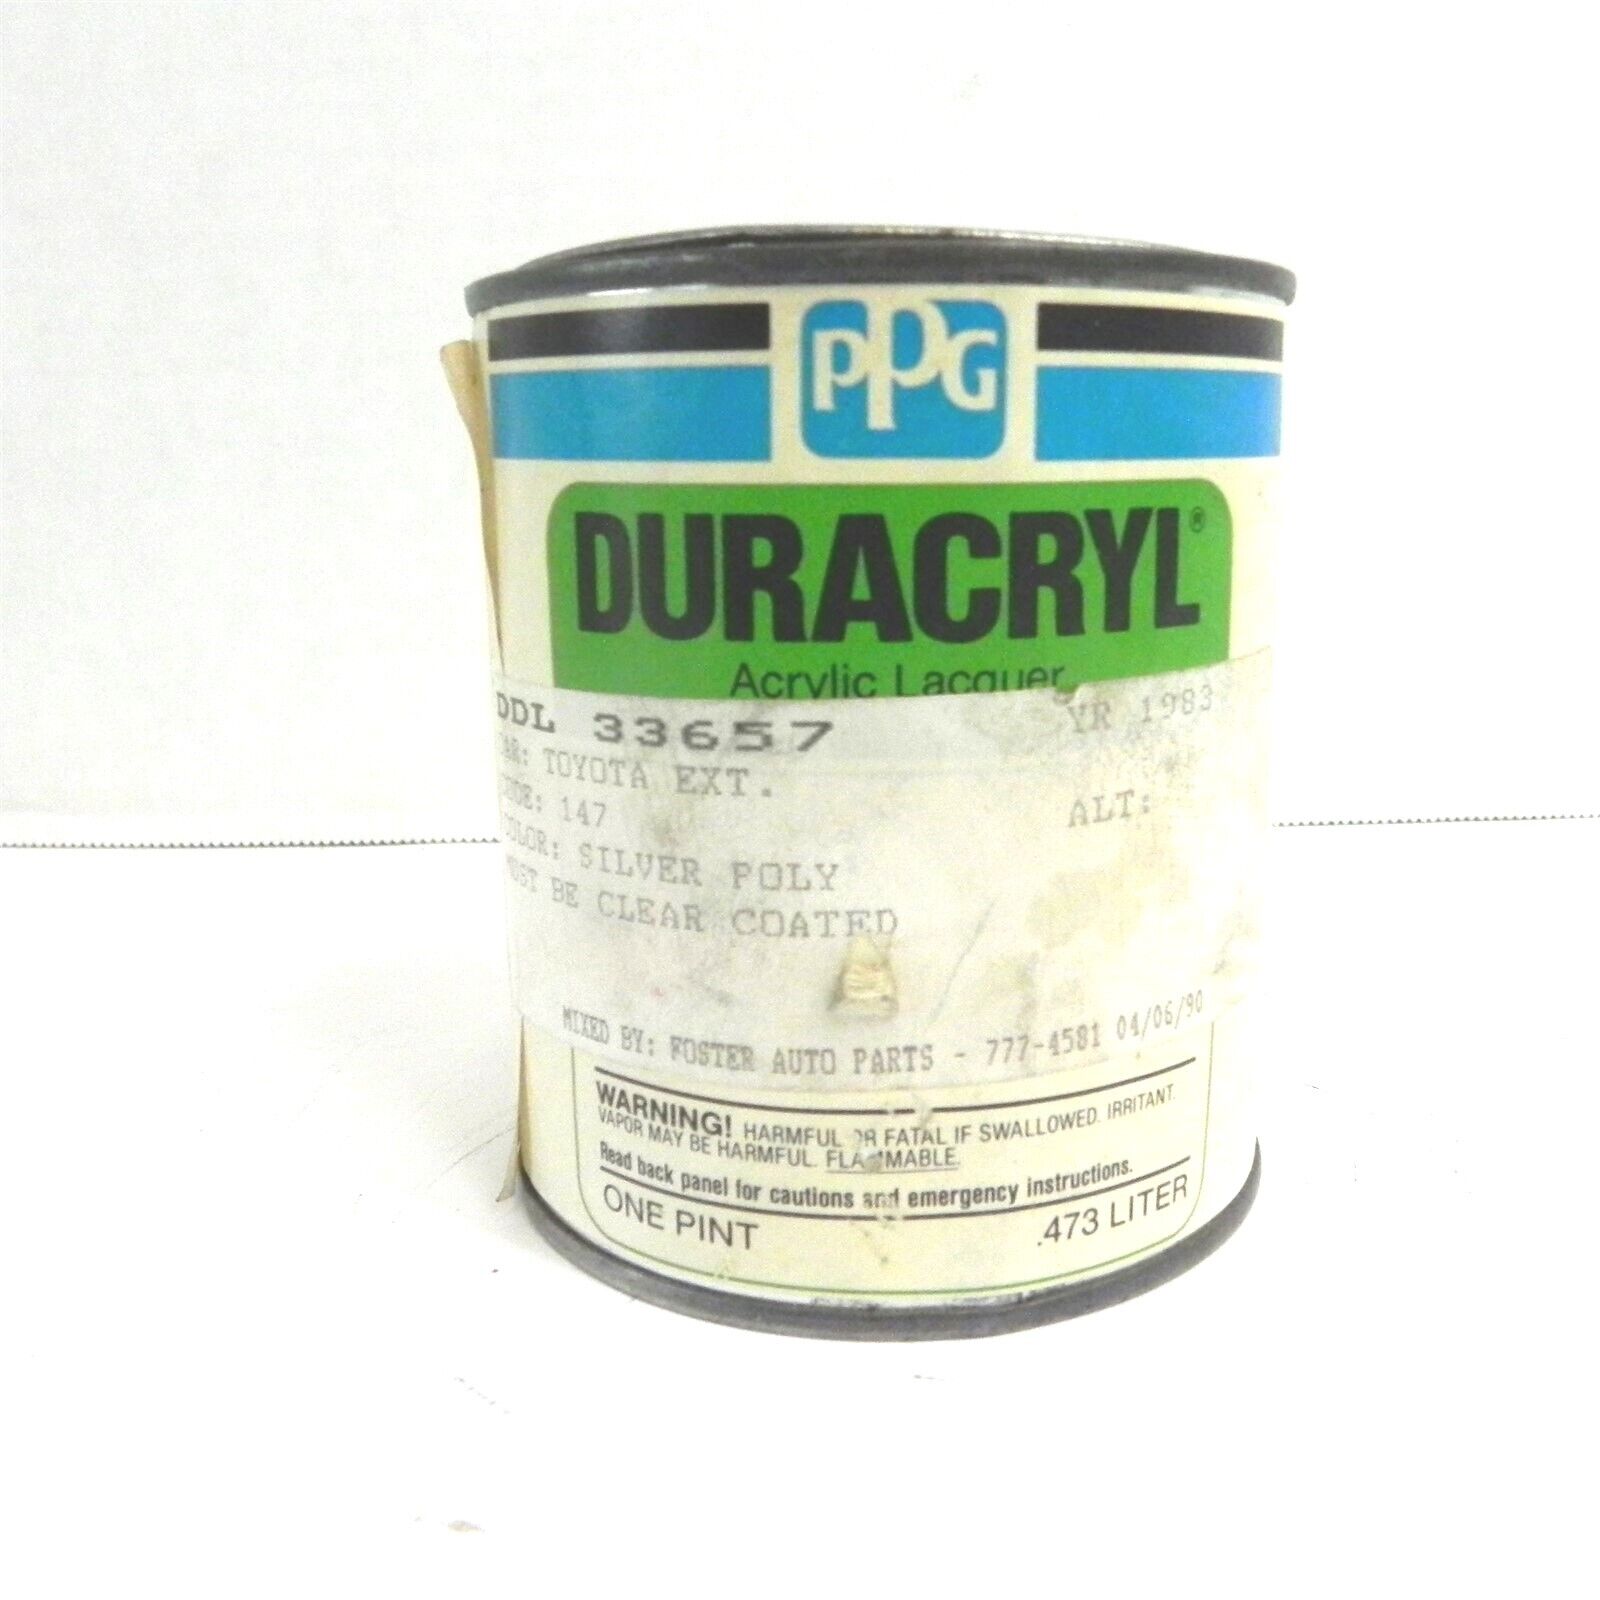 VINTAGE PPG DURACRYL ACRYLIC LACQUER 1 PINT CAN ALMOST EMPTY 1983 TOYOTA SILVER